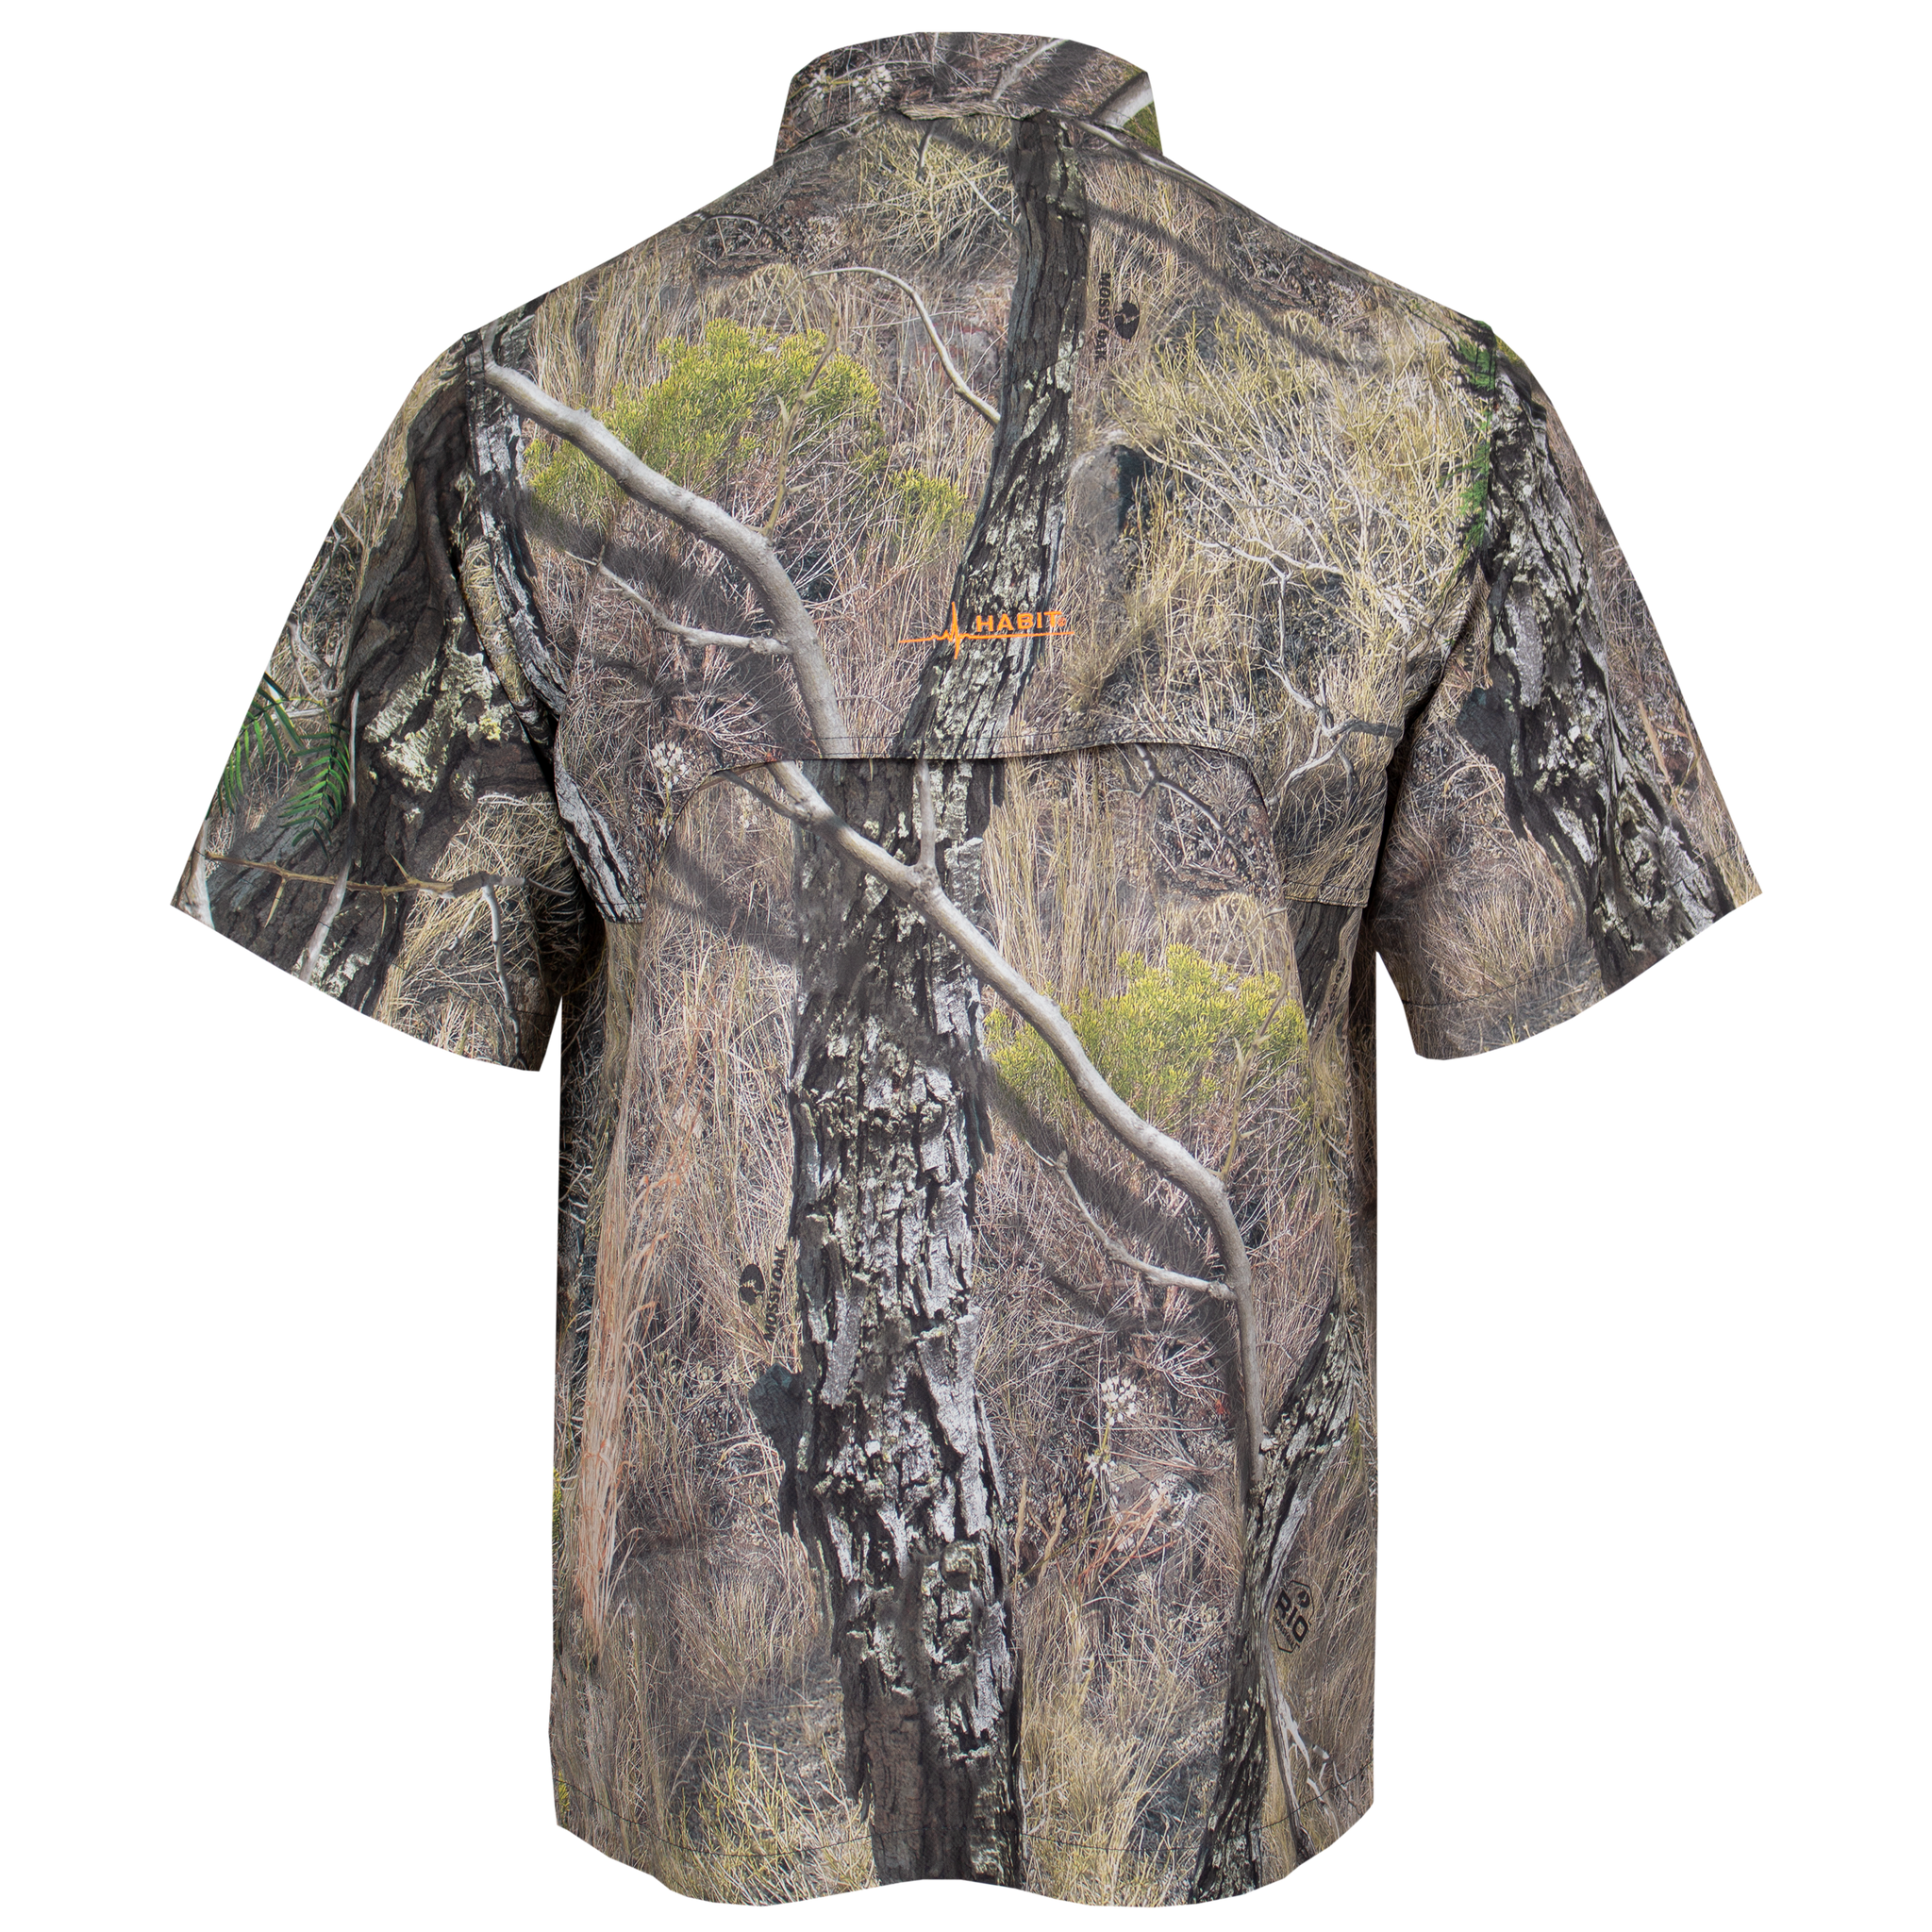 Men's Outfitter Junction Short Sleeve Camo Shirt Mossy Oak Rio back on form